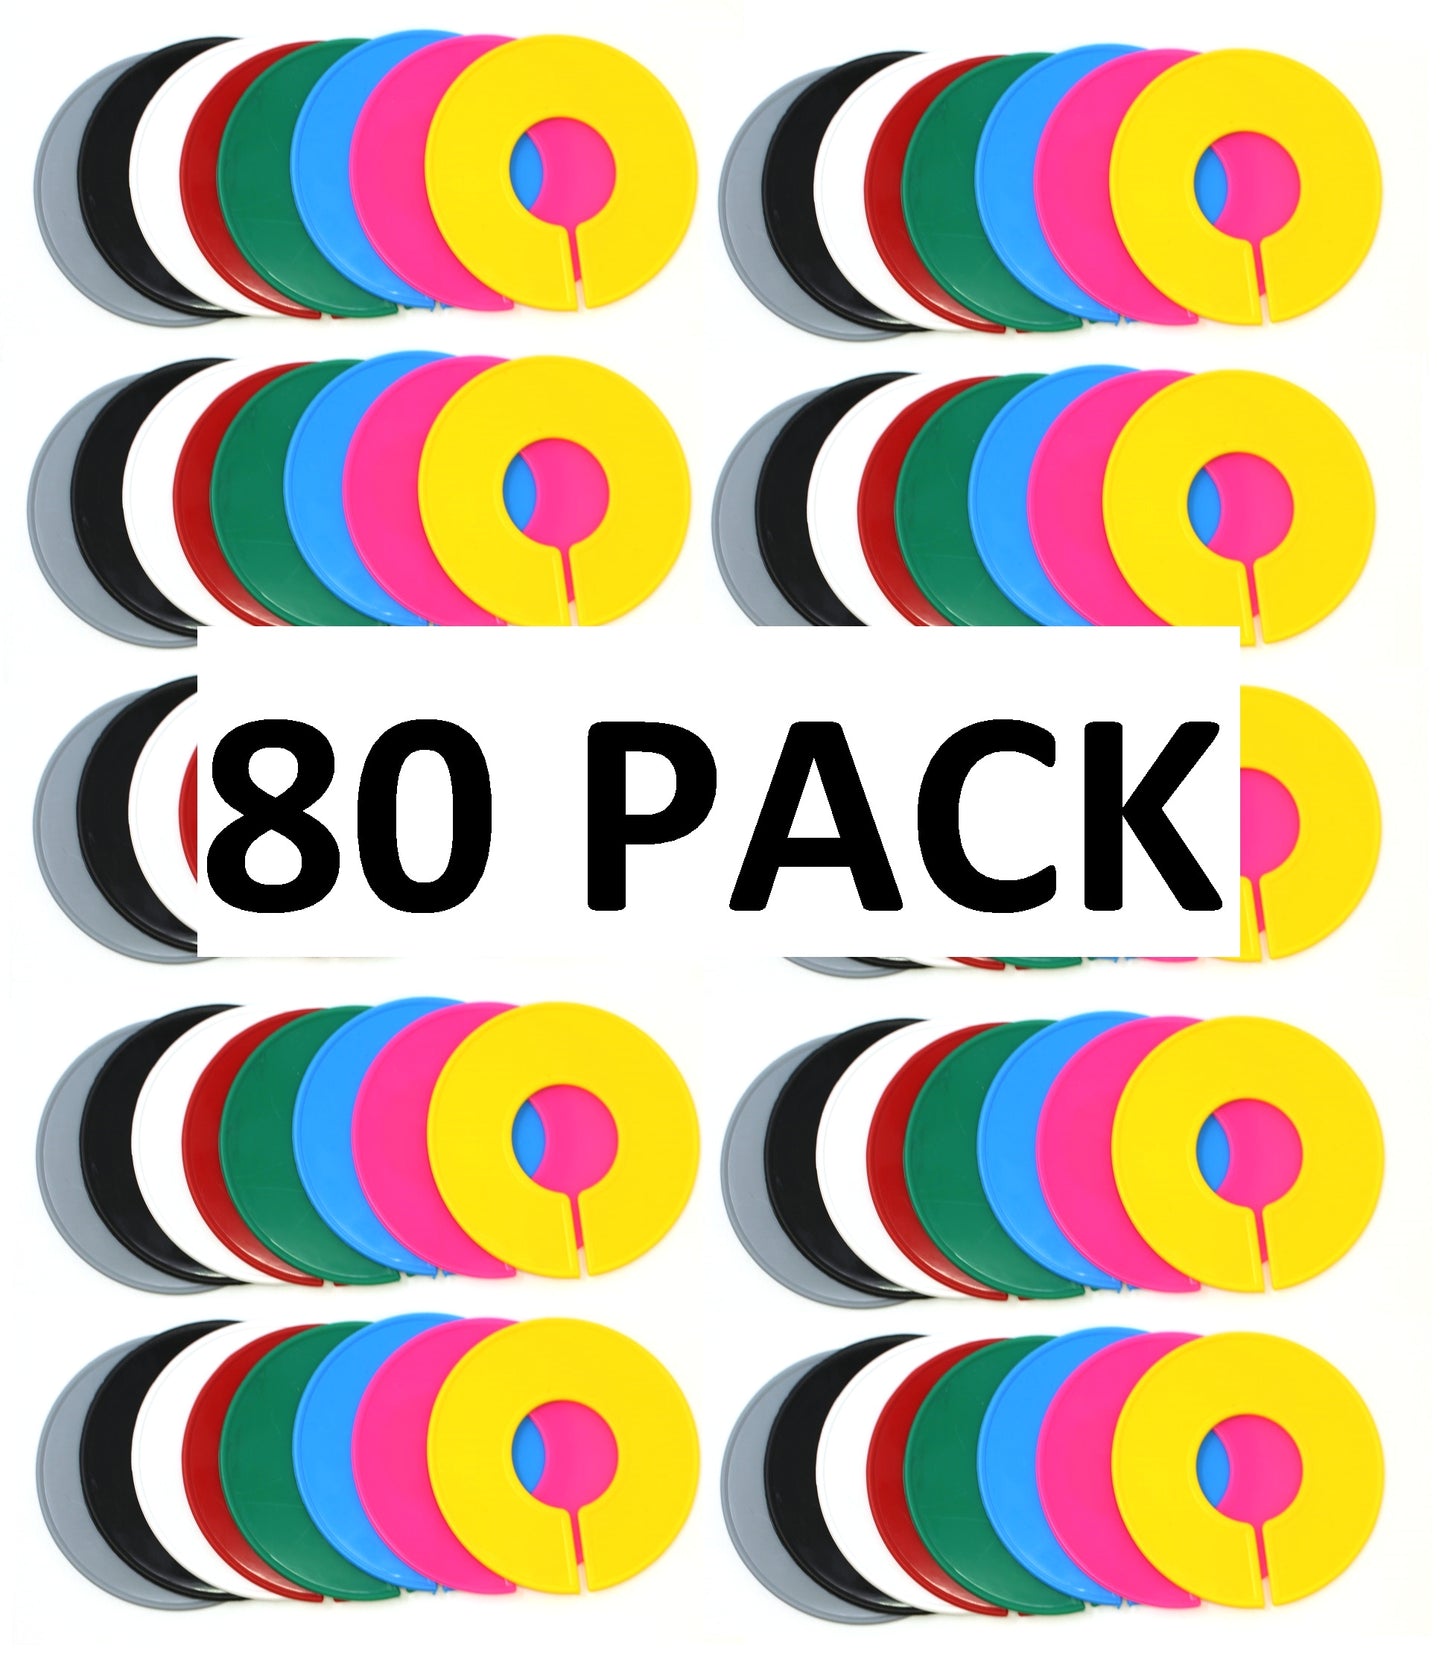 Blank Round Plastic Rack Size Dividers - Variety Color Pack (1 of each color)